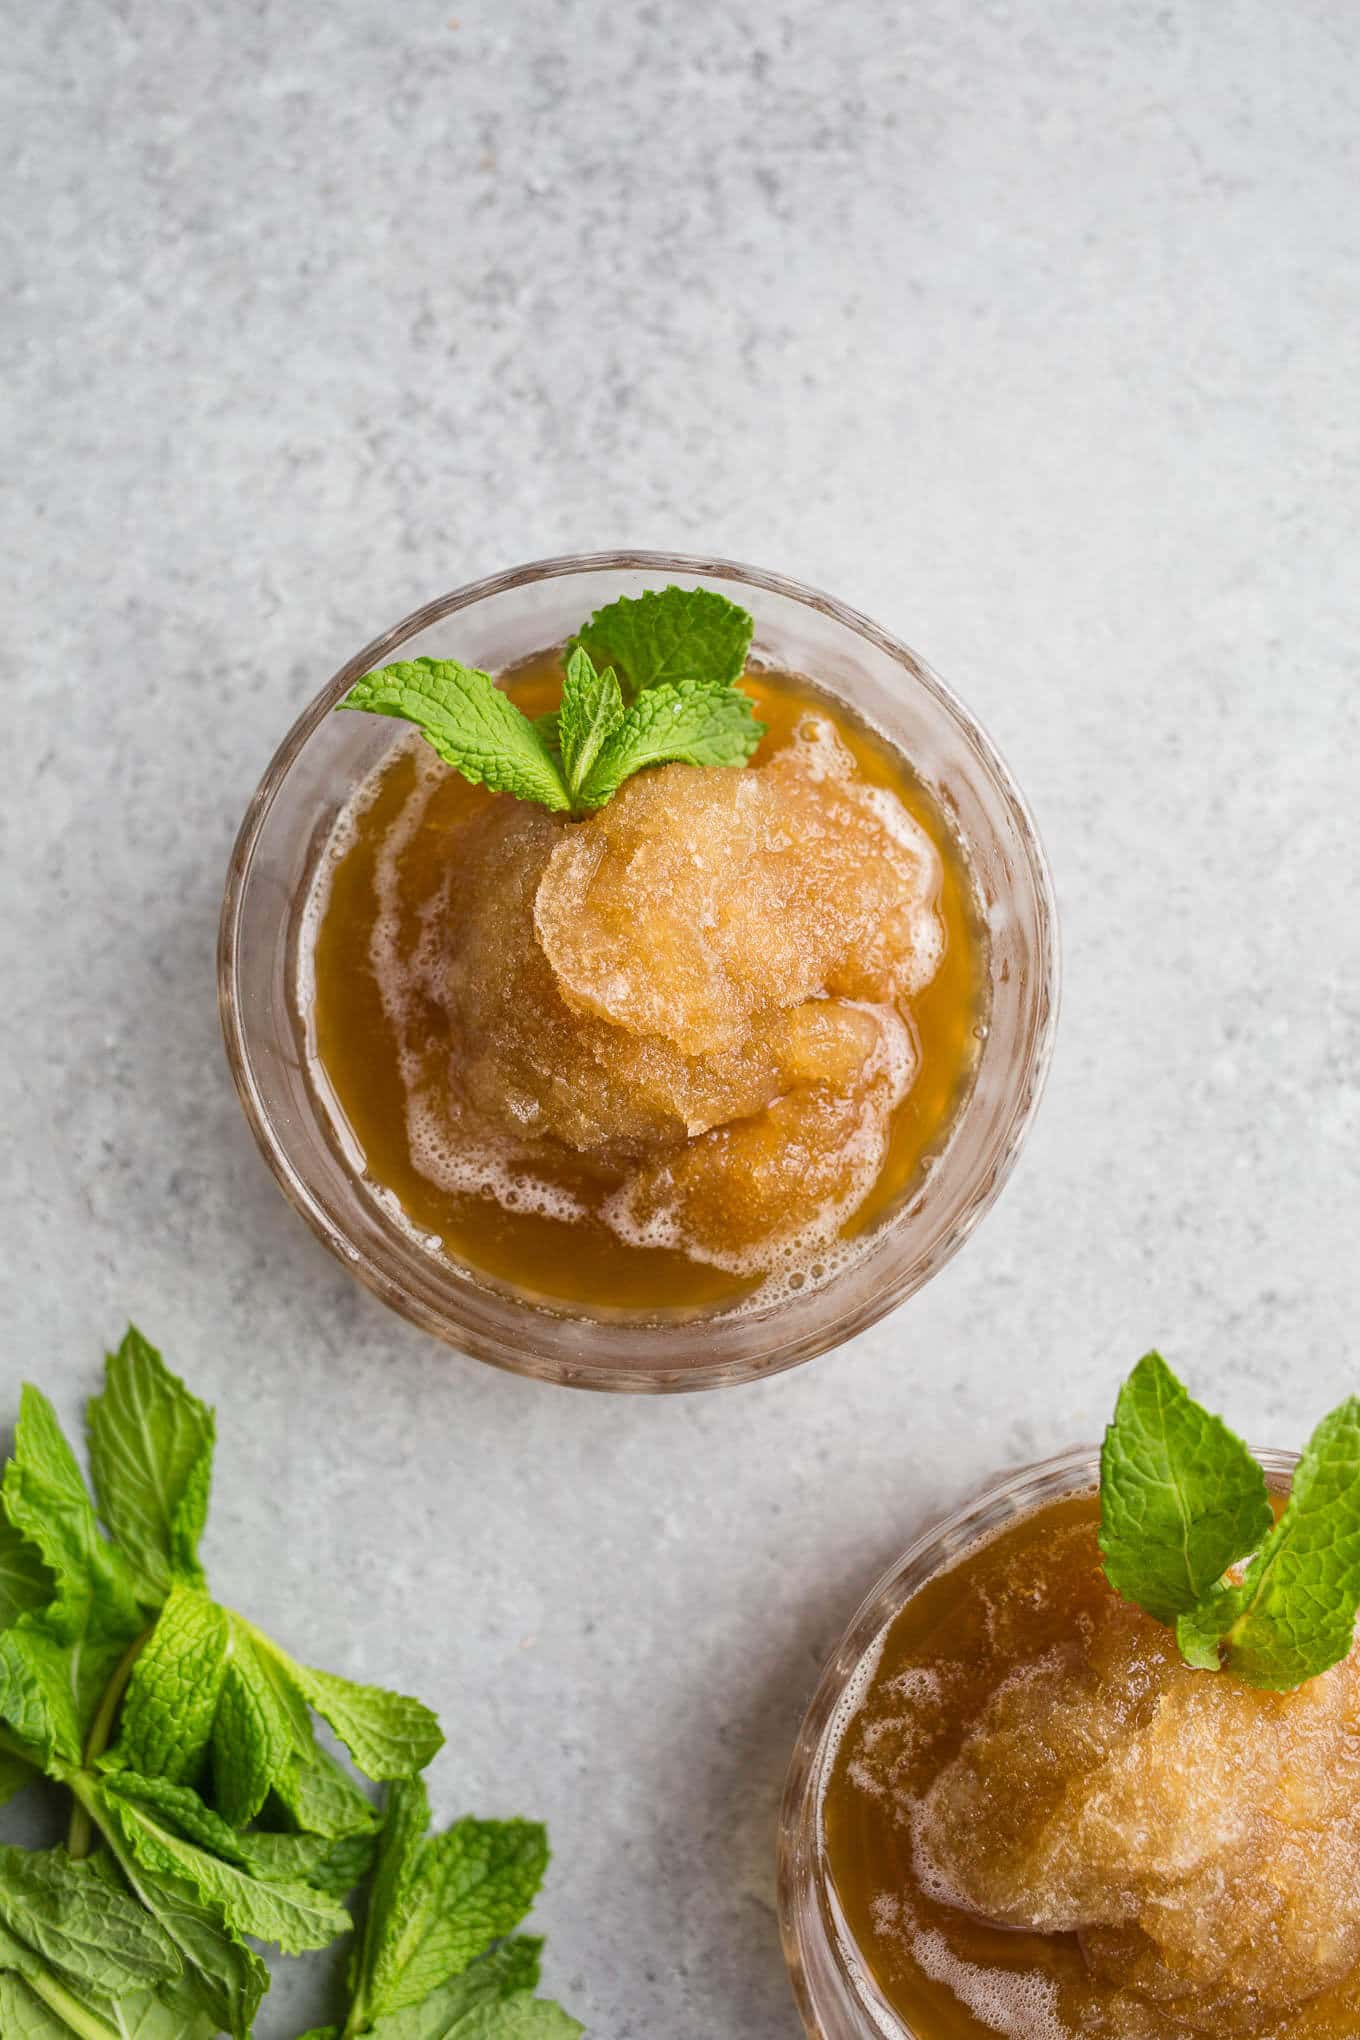 Mint Julep Granitas are made with a honey and mint infused simple syrup, bourbon, and are frozen until icy, flaked with a fork and frozen again. Served in a cup and garnished with mint.